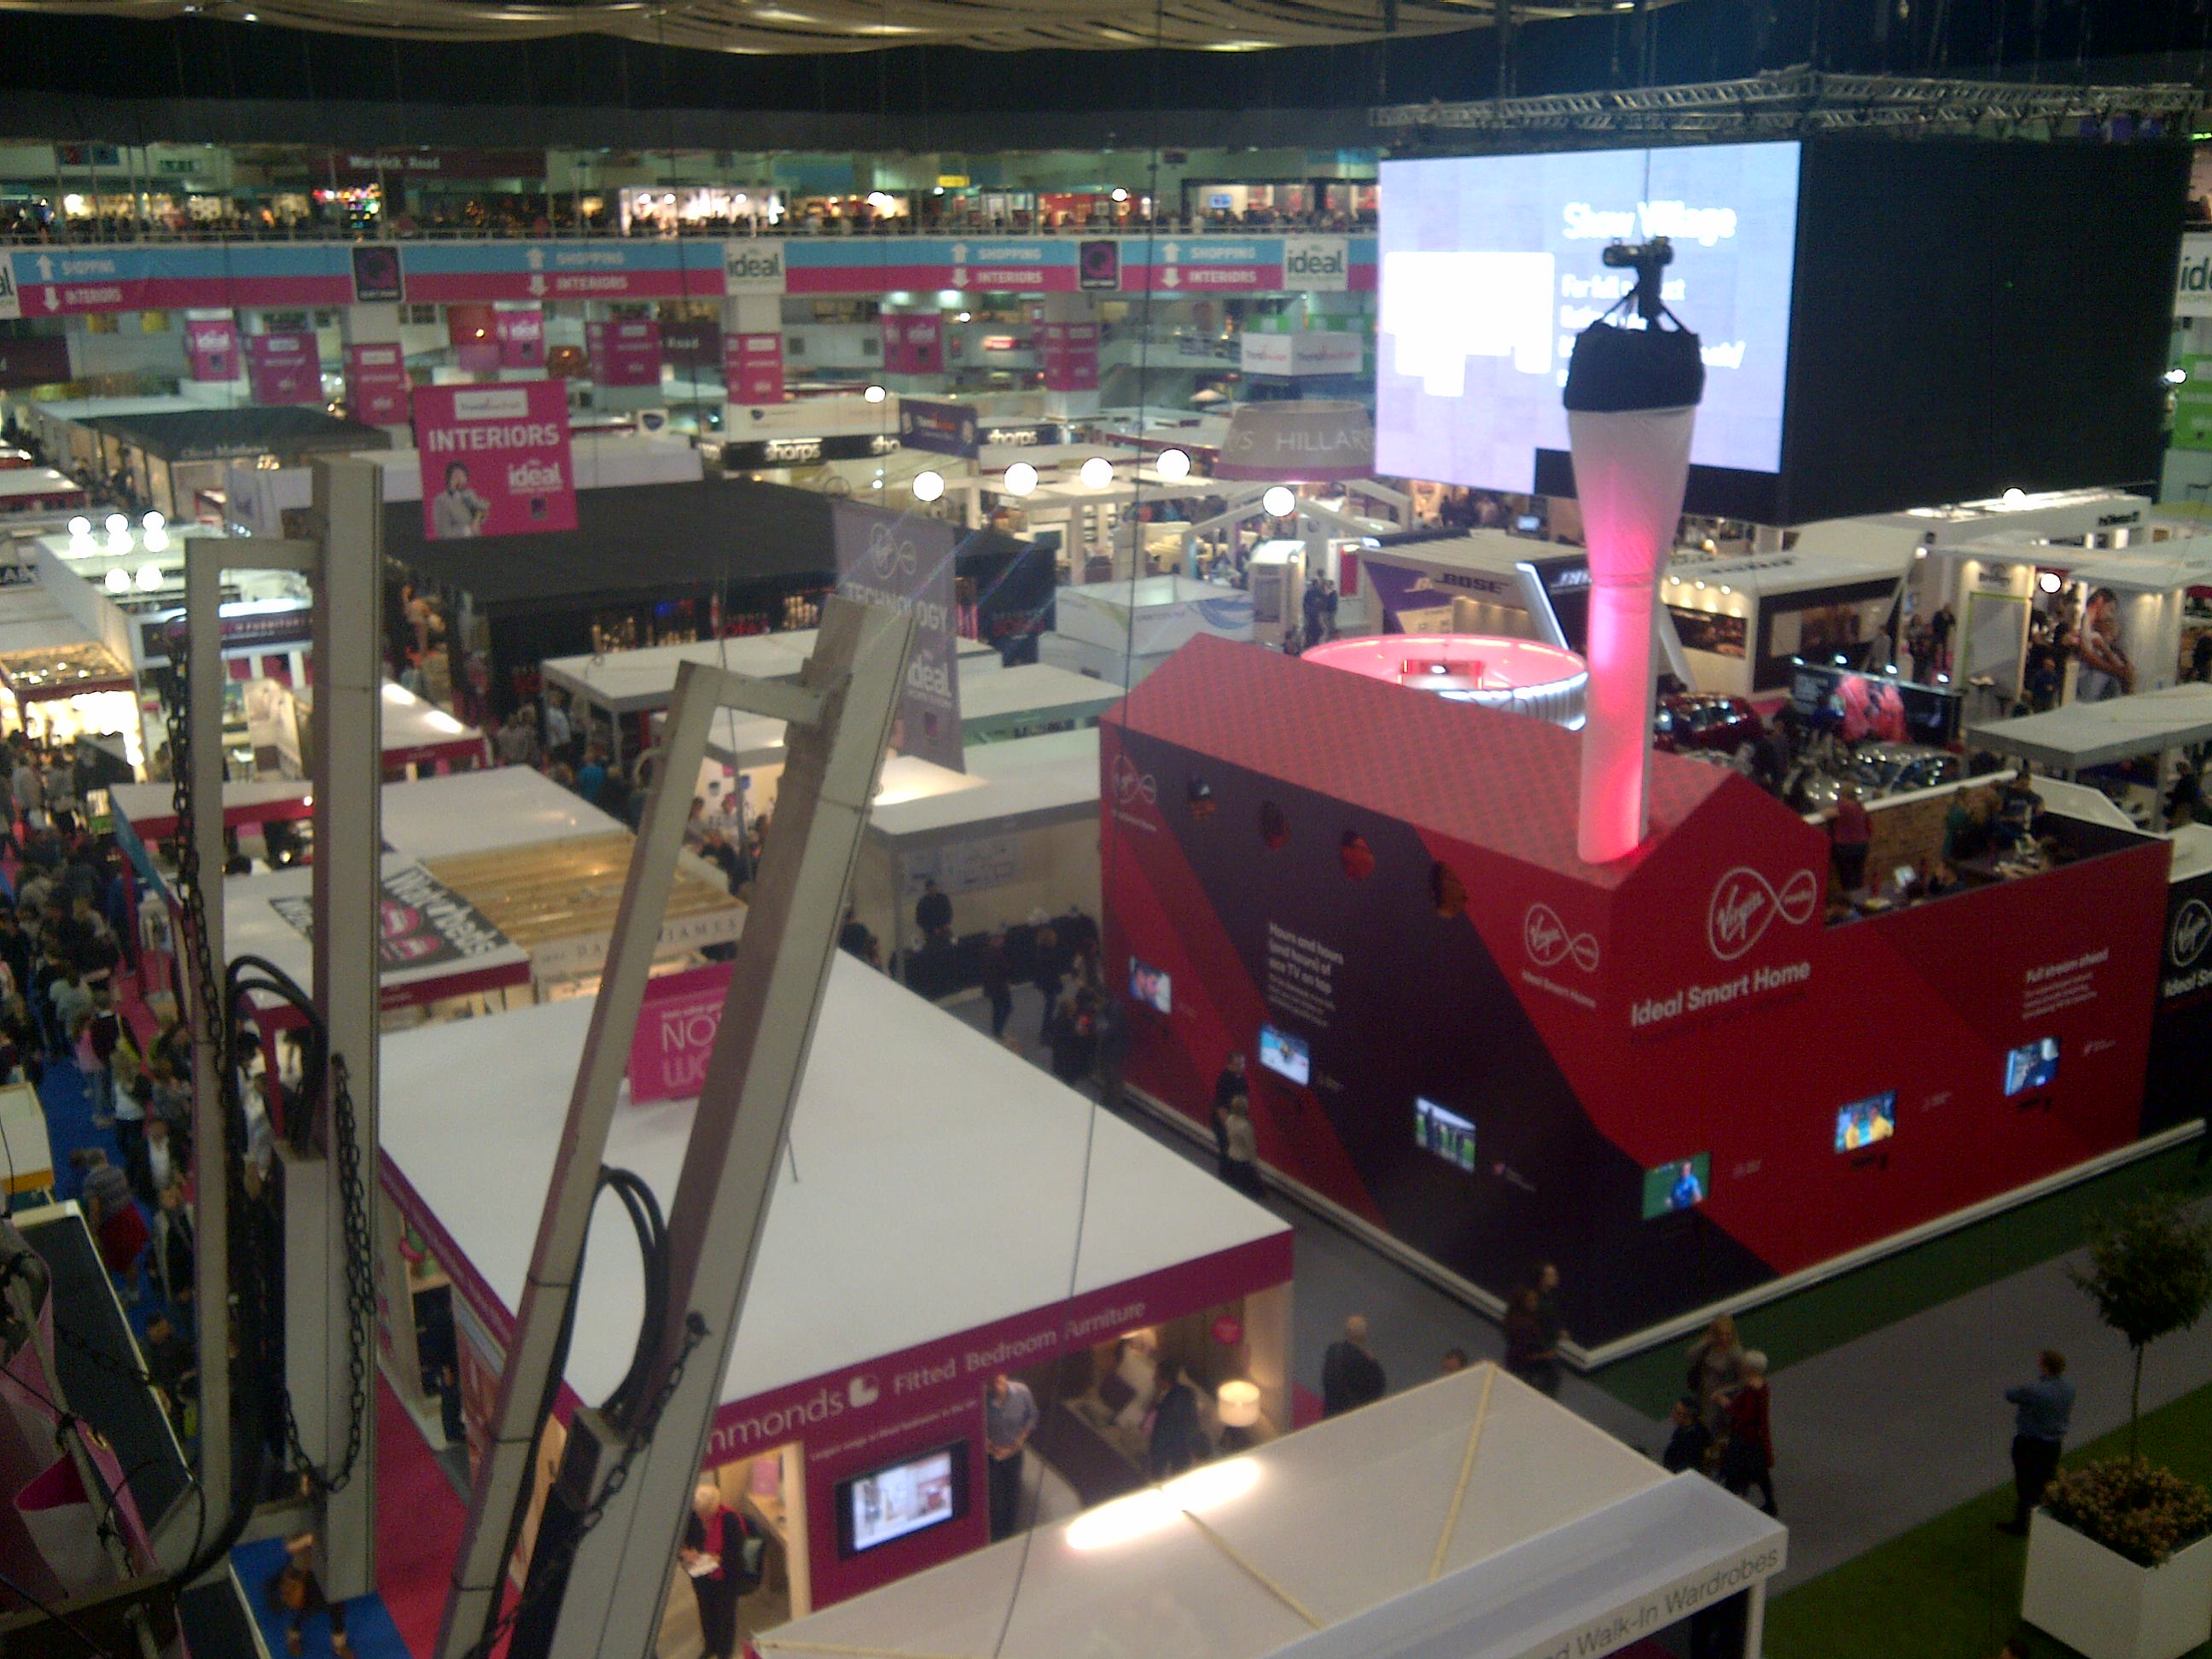 Earls Court packed full with ideas and interior design inspiration